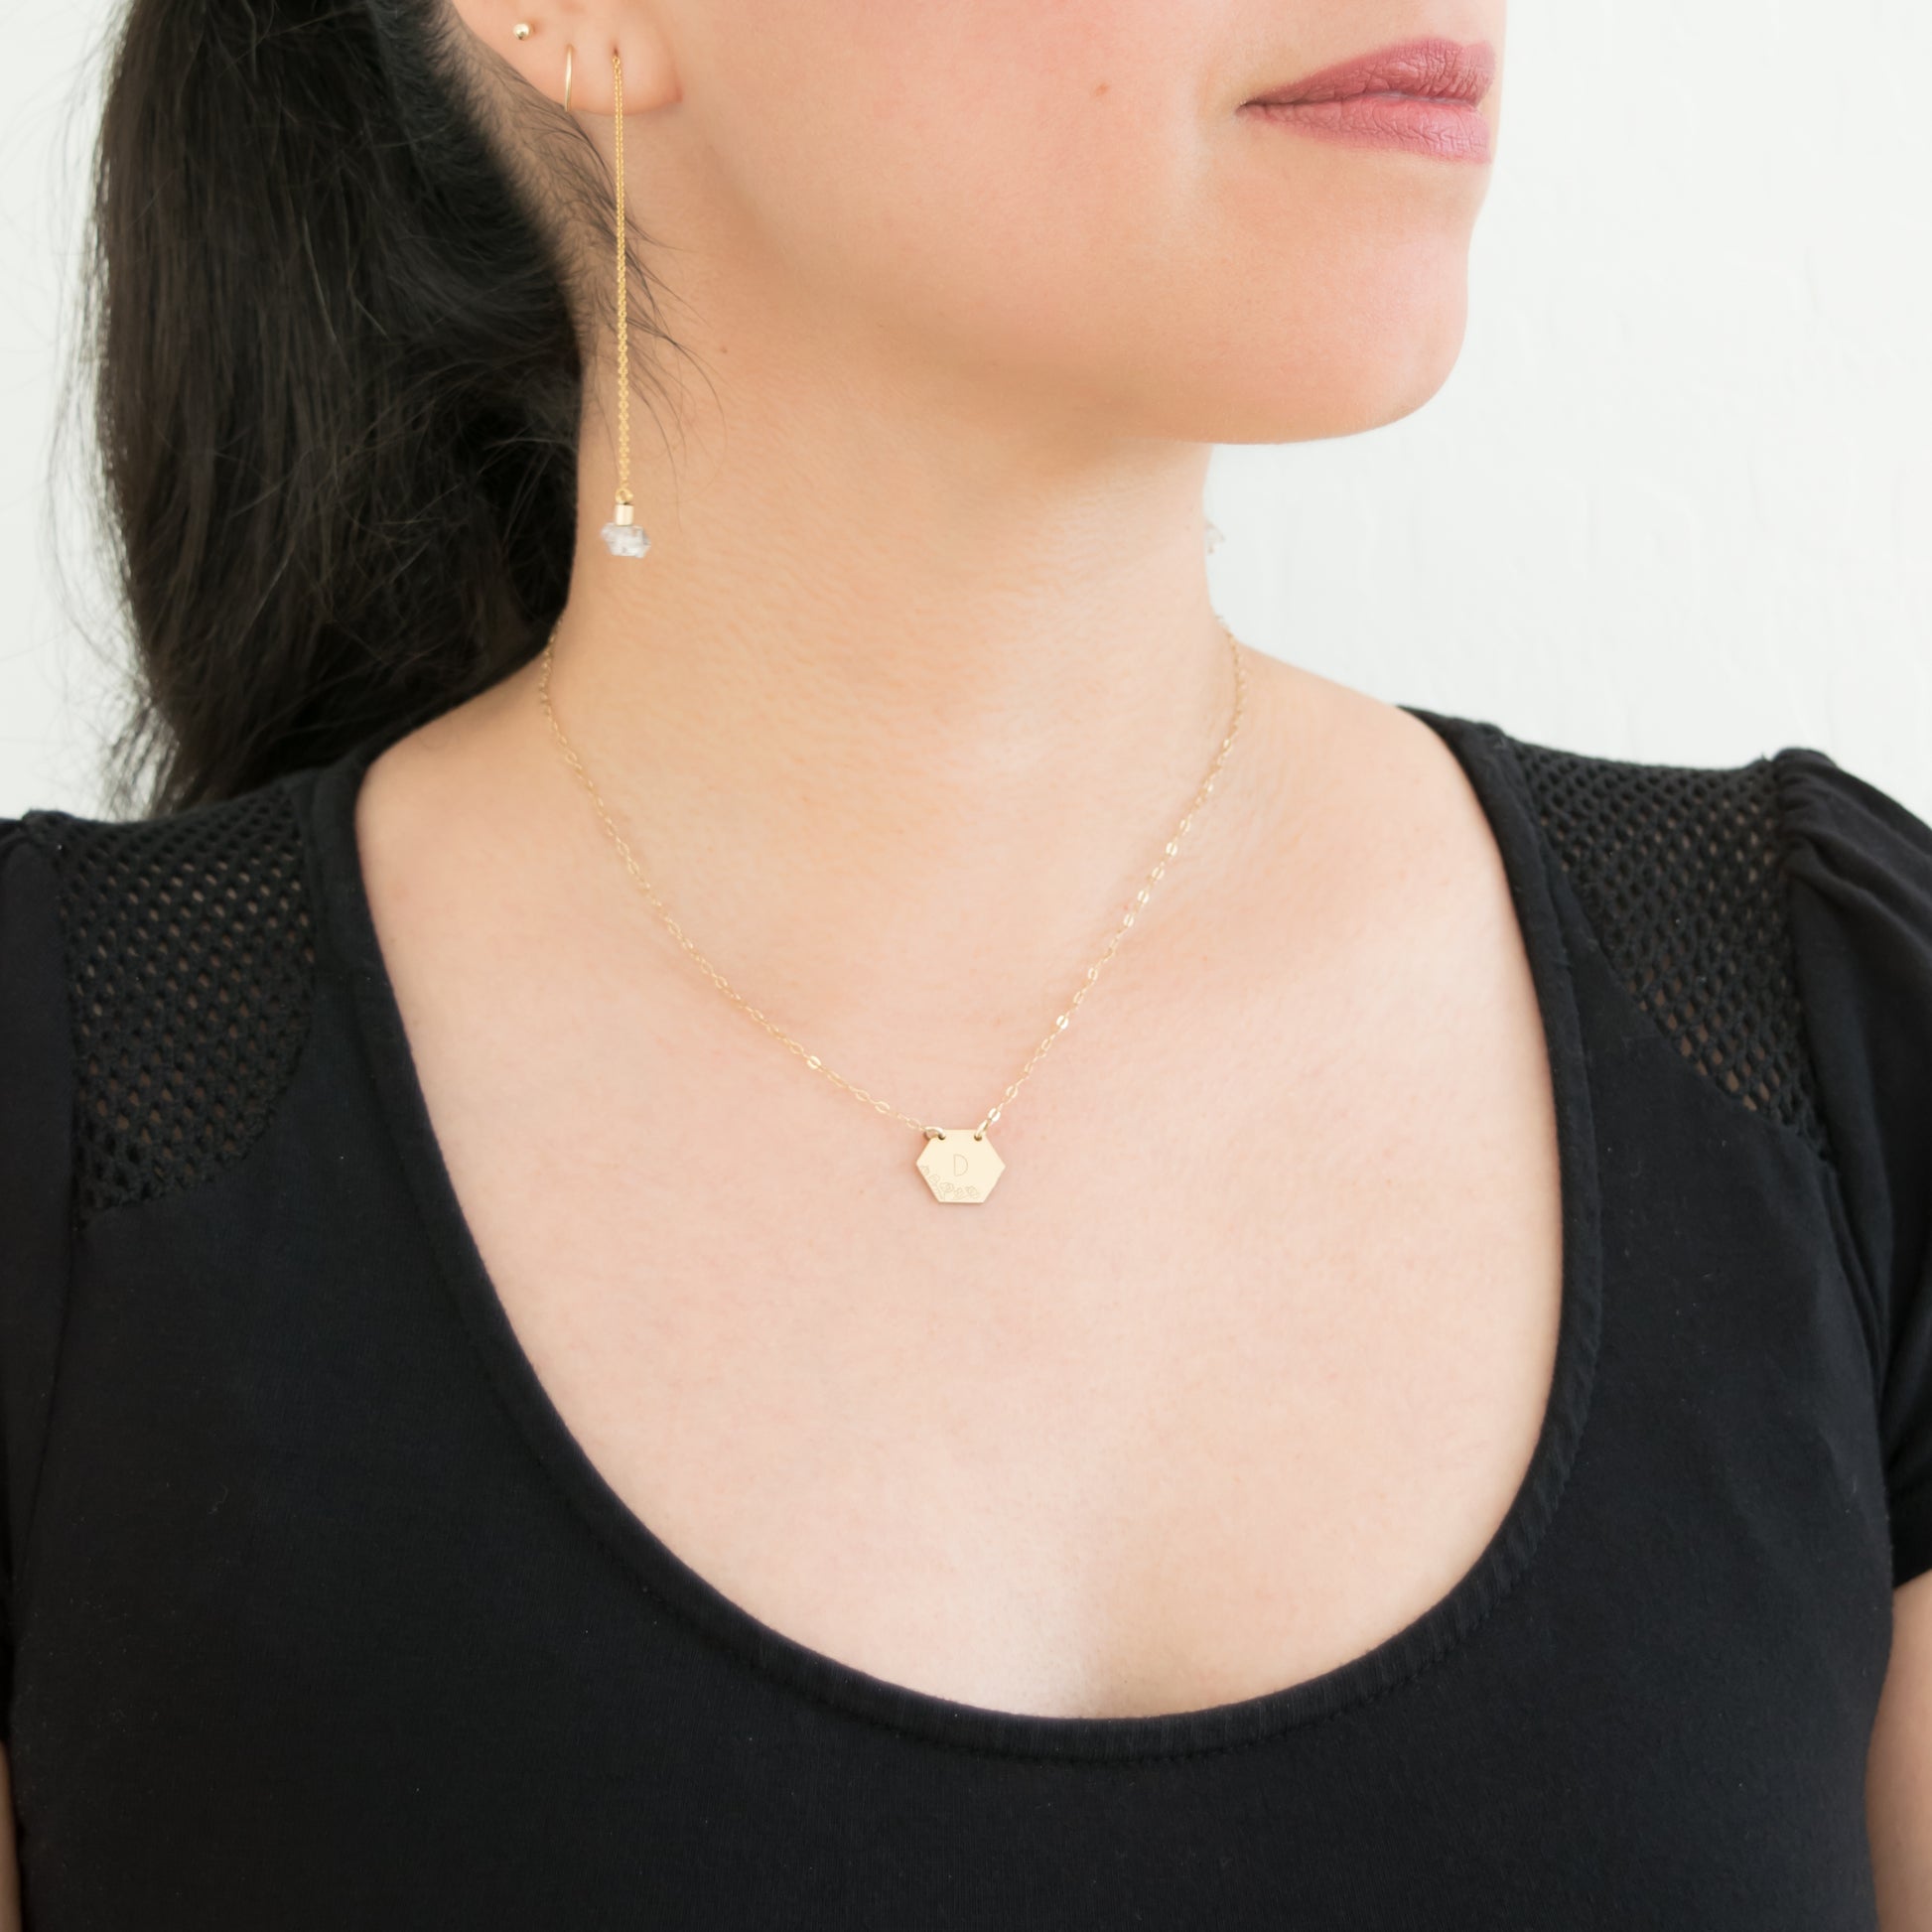 Nature-Inspired Joy Hexagon Initial Necklace - Personalized and Elegant Handcrafted Jewelry